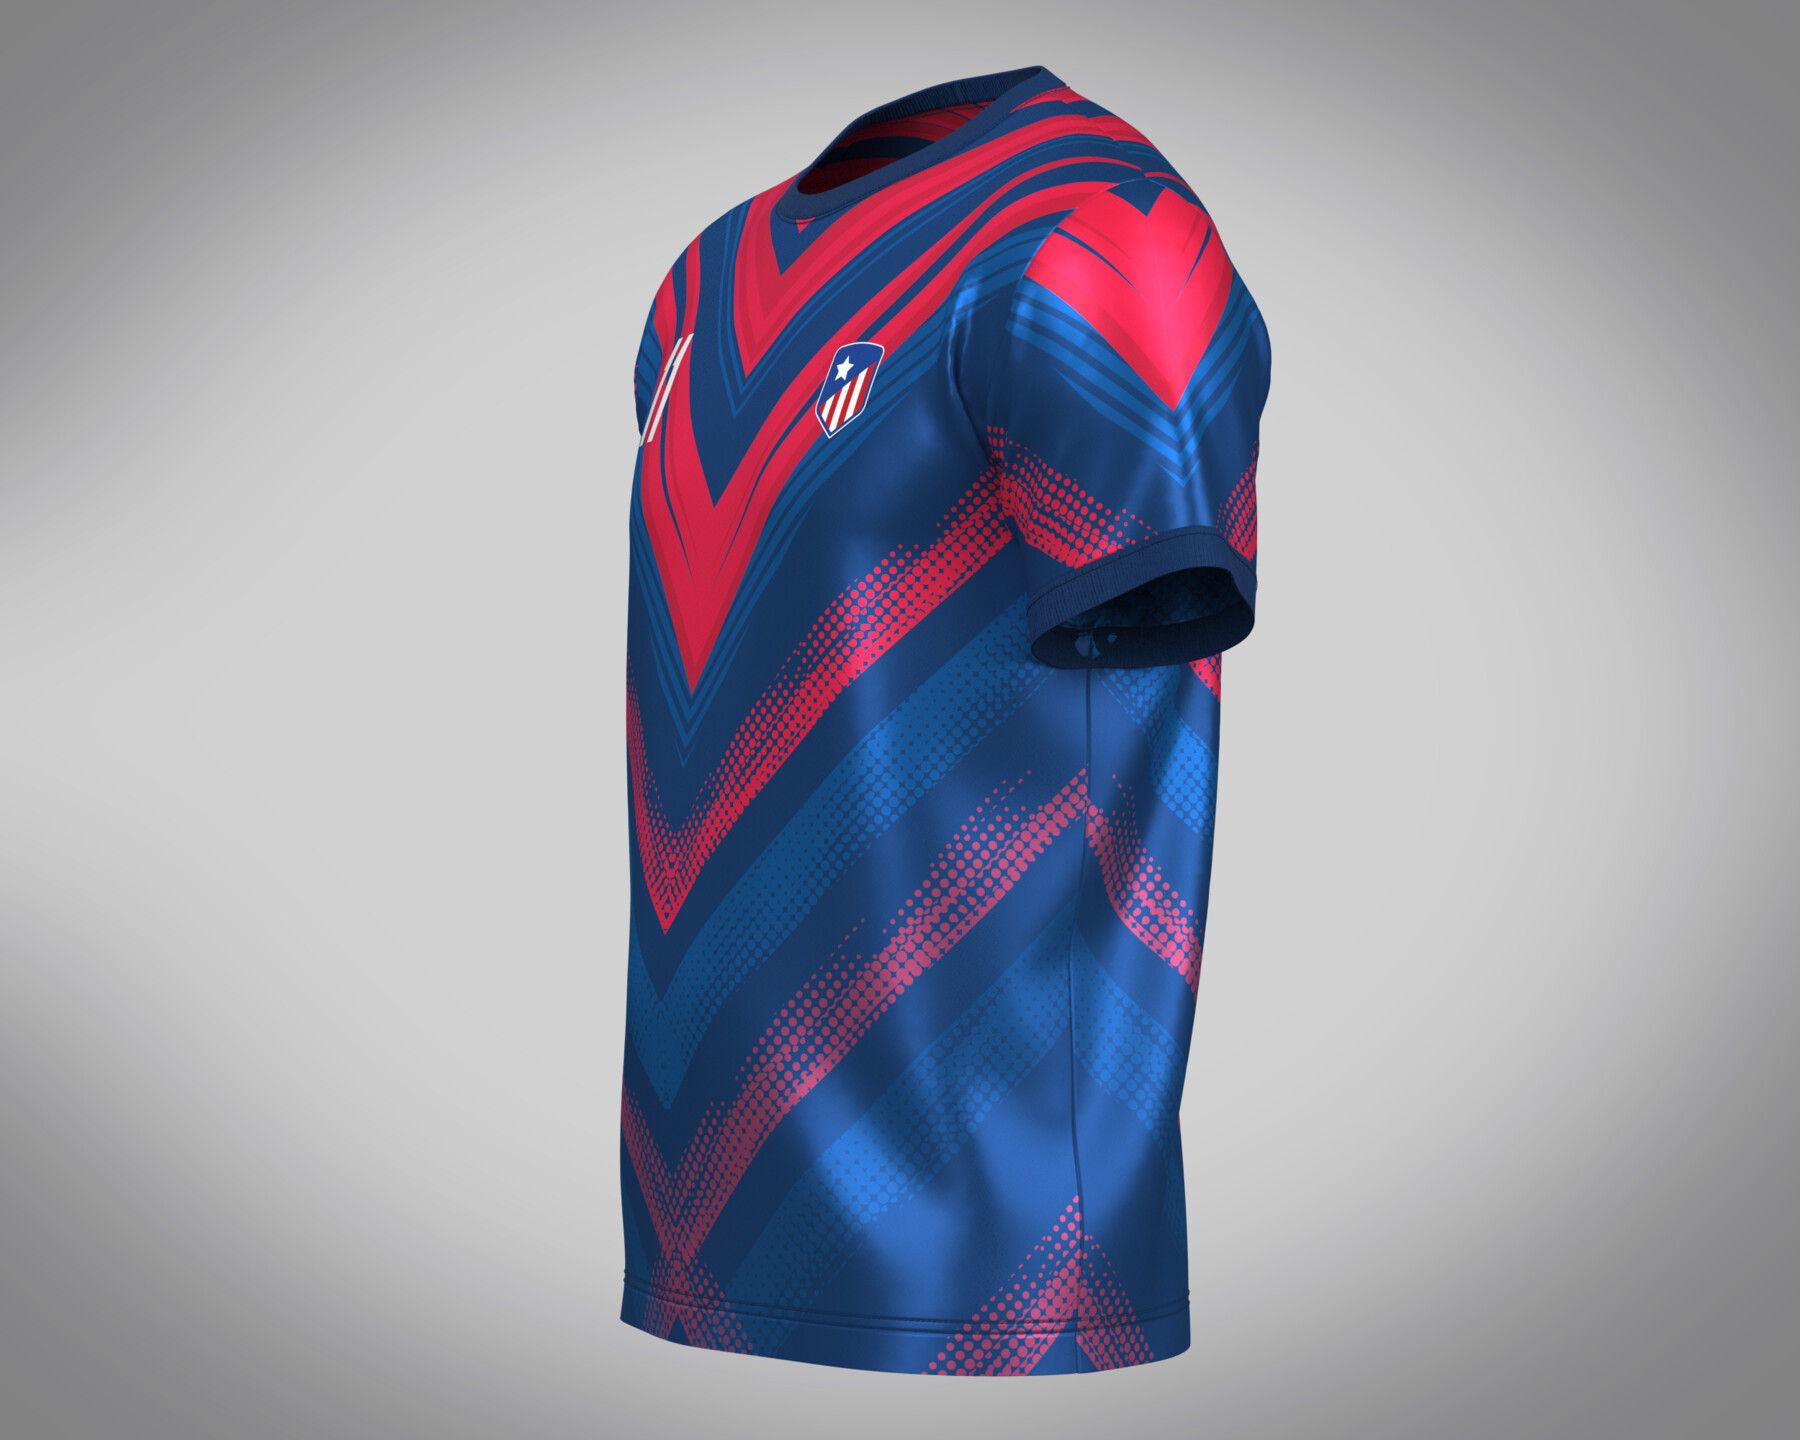 ArtStation - Soccer Red & Blue Football Jersey Player 11 | Resources